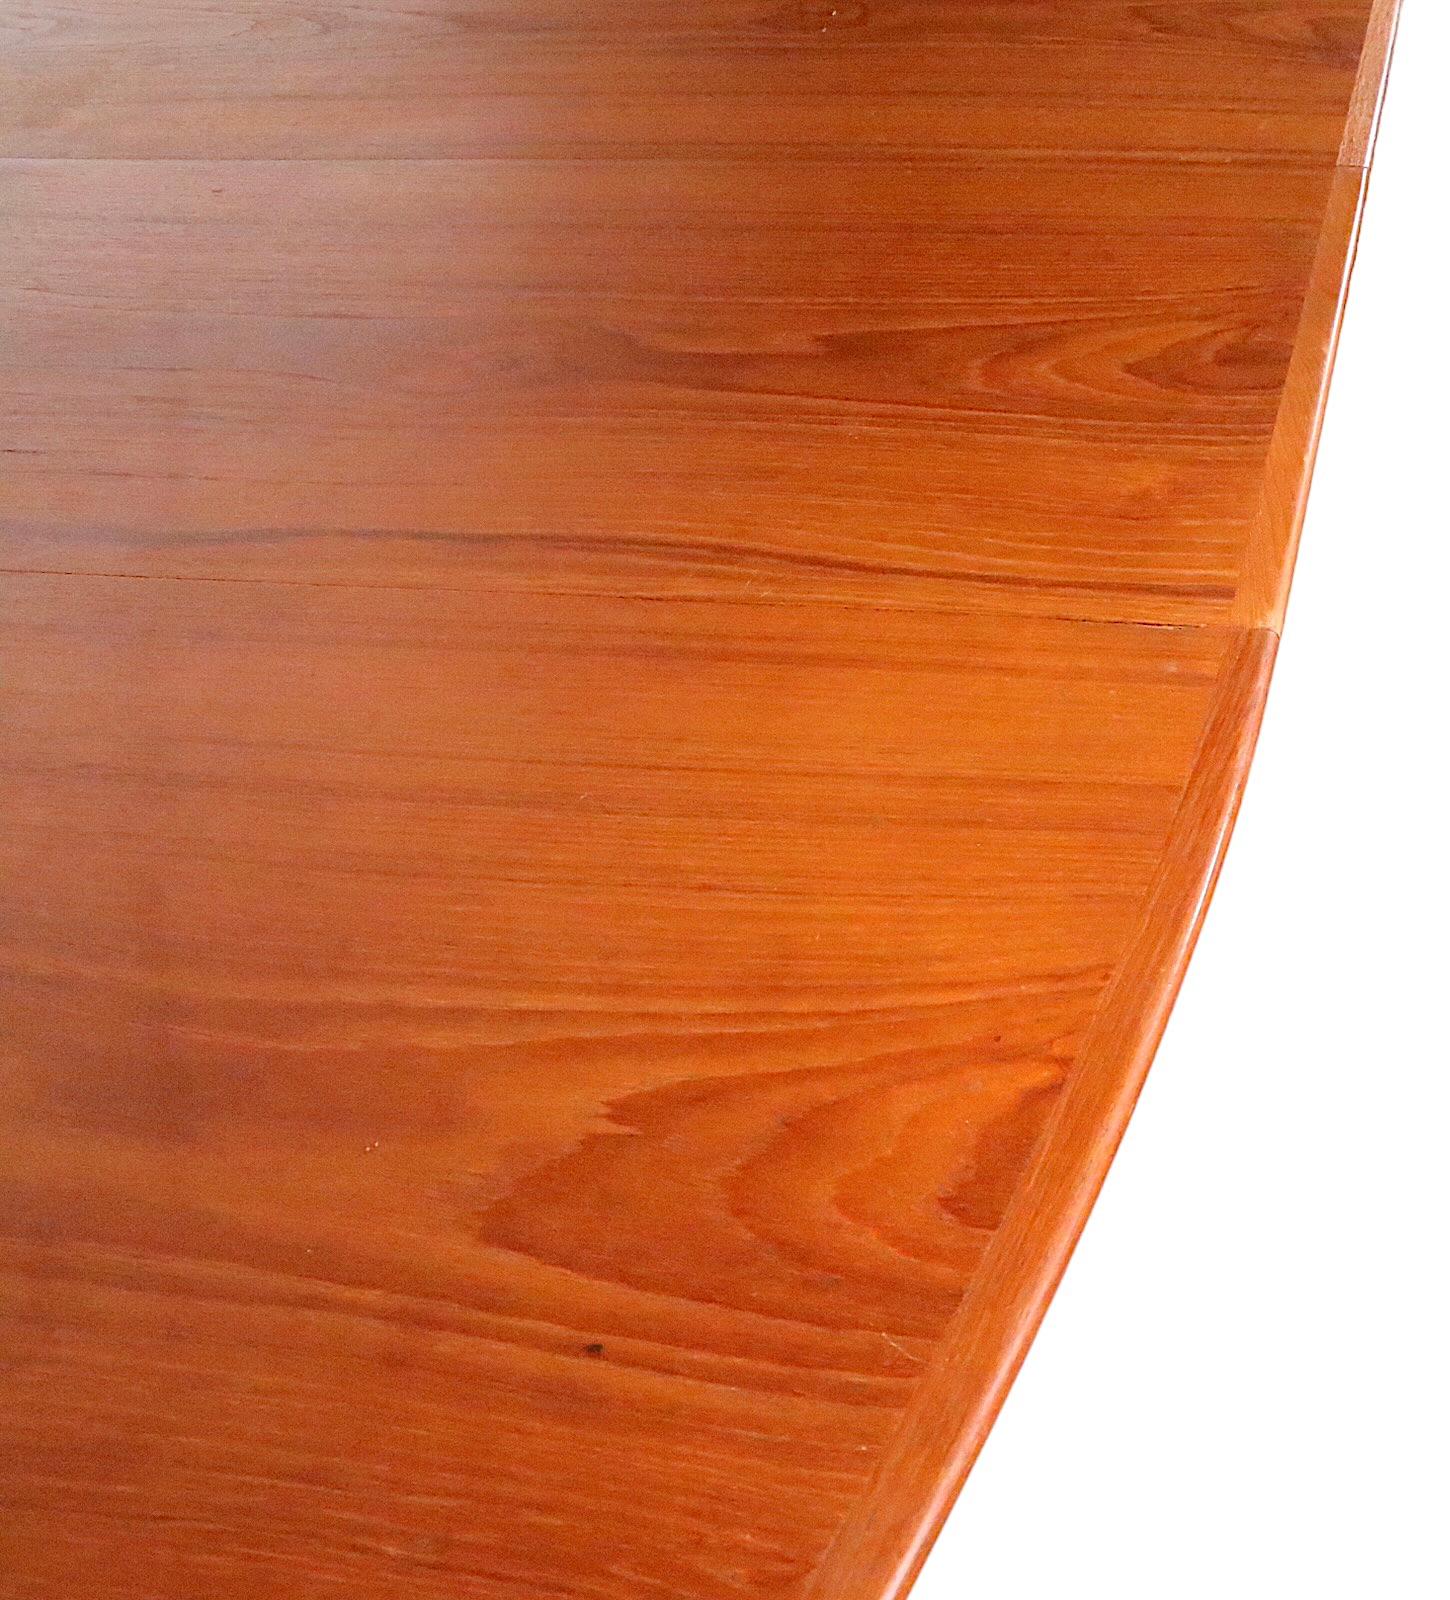 Danish Mid Century Modern Teak Extension  Dining Table by H W Klein  c 1950's For Sale 3